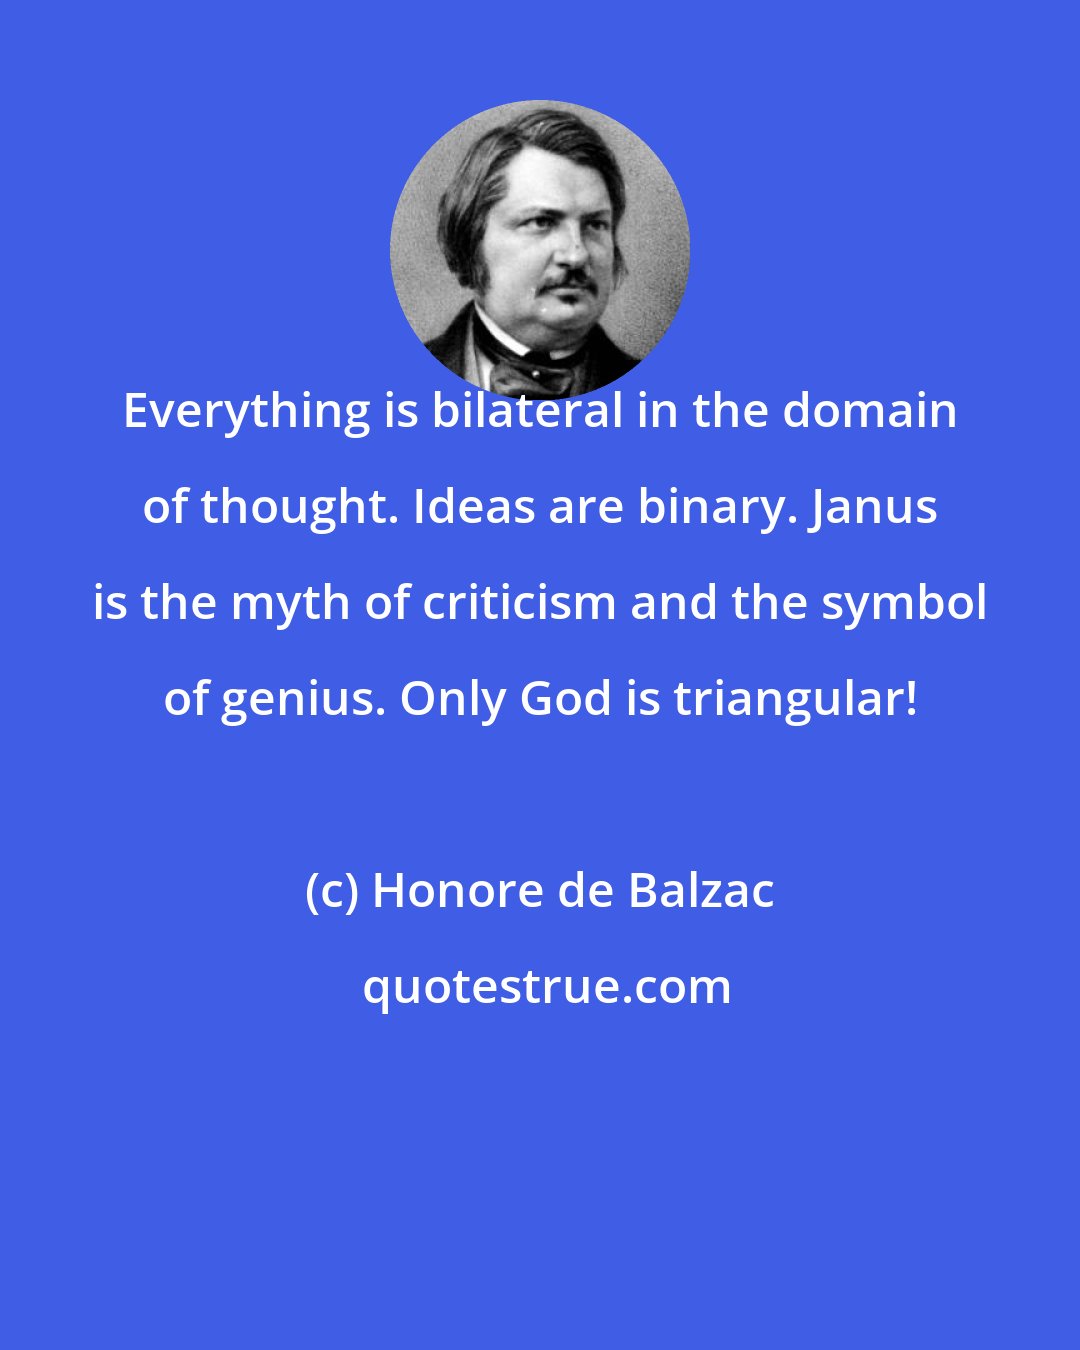 Honore de Balzac: Everything is bilateral in the domain of thought. Ideas are binary. Janus is the myth of criticism and the symbol of genius. Only God is triangular!